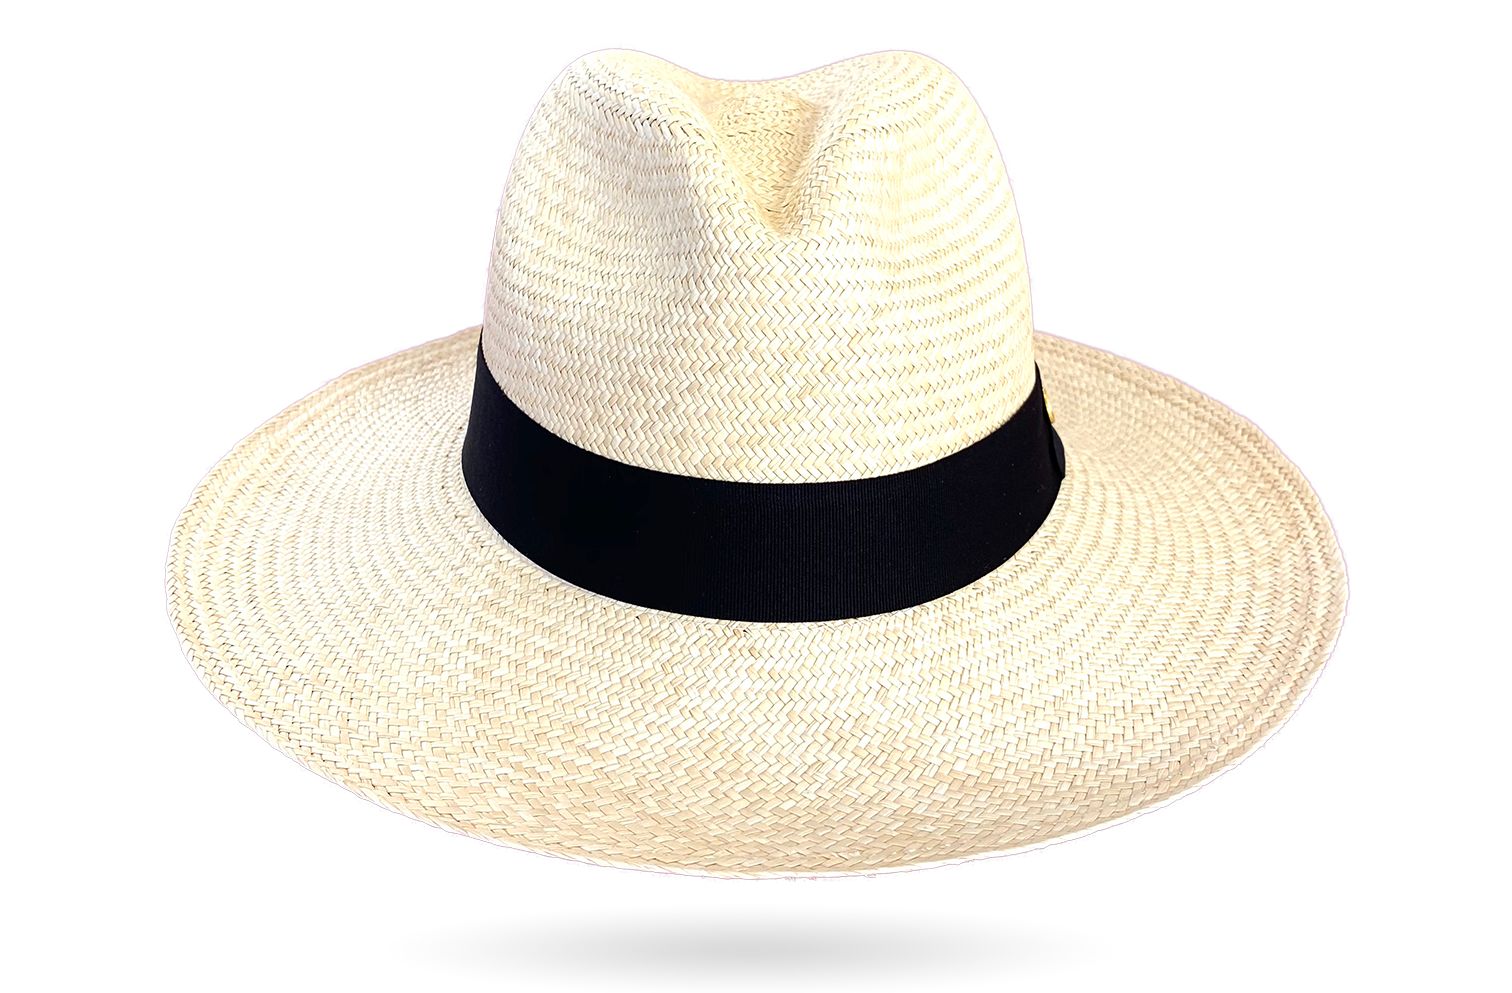 FINE 'VOYAGER' PANAMA HAT ROLLABLE / FOLDABLE WIDE BRIM